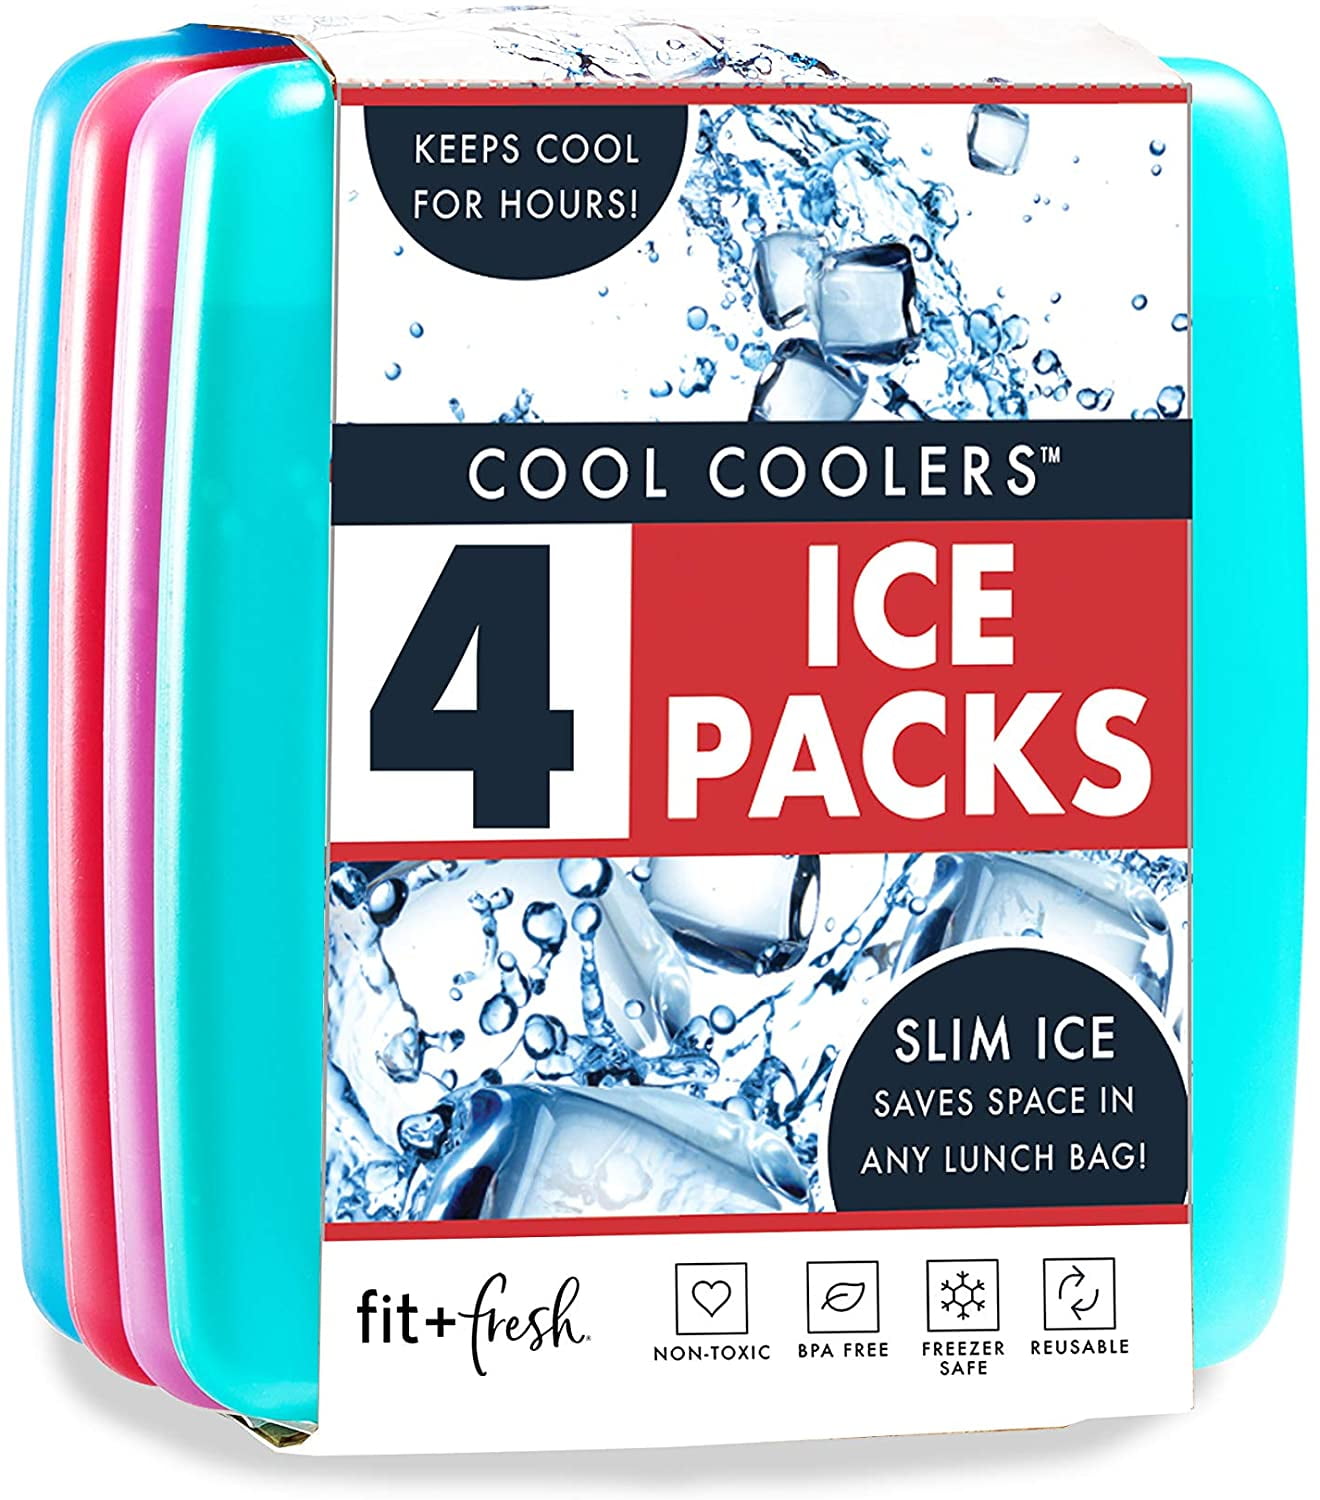 Details about   Brand New Fit & Fresh Cool Coolers 6 Pack Set of 3 Hard & 3 Soft Ice Packs lunch 